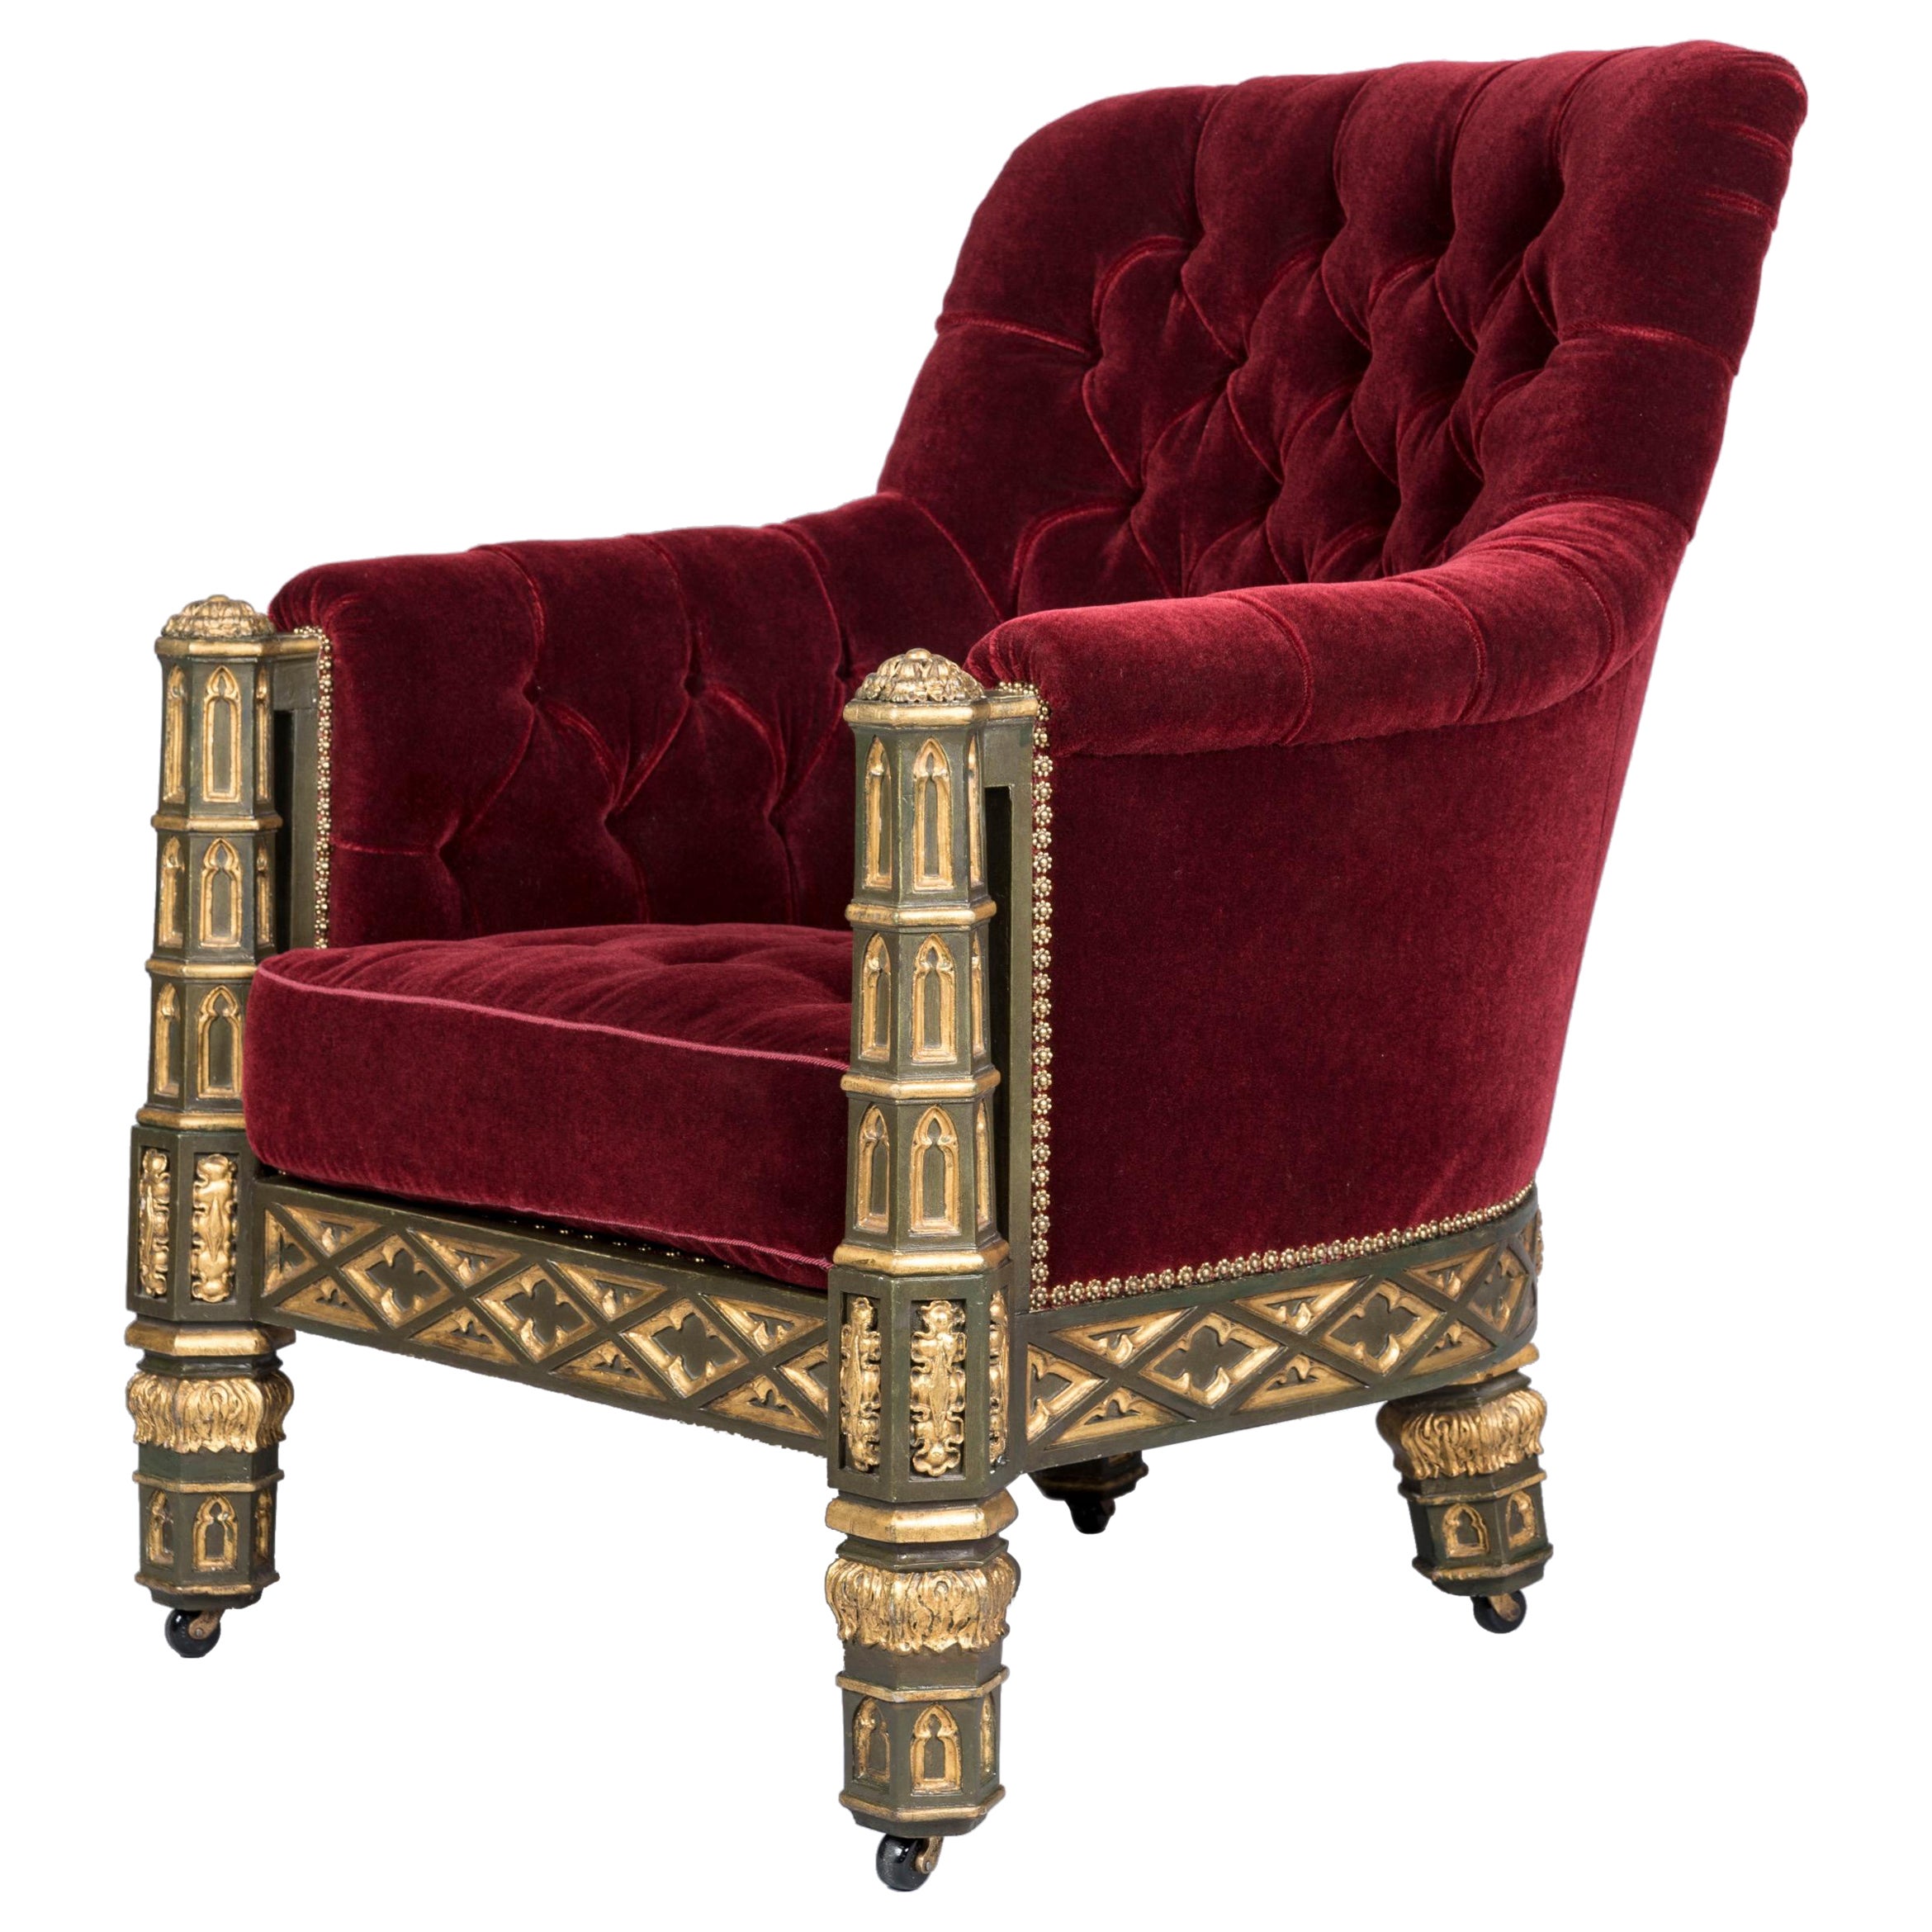 Rare 19th Century Gothic Revival Armchair from Eaton Hall by Gillows